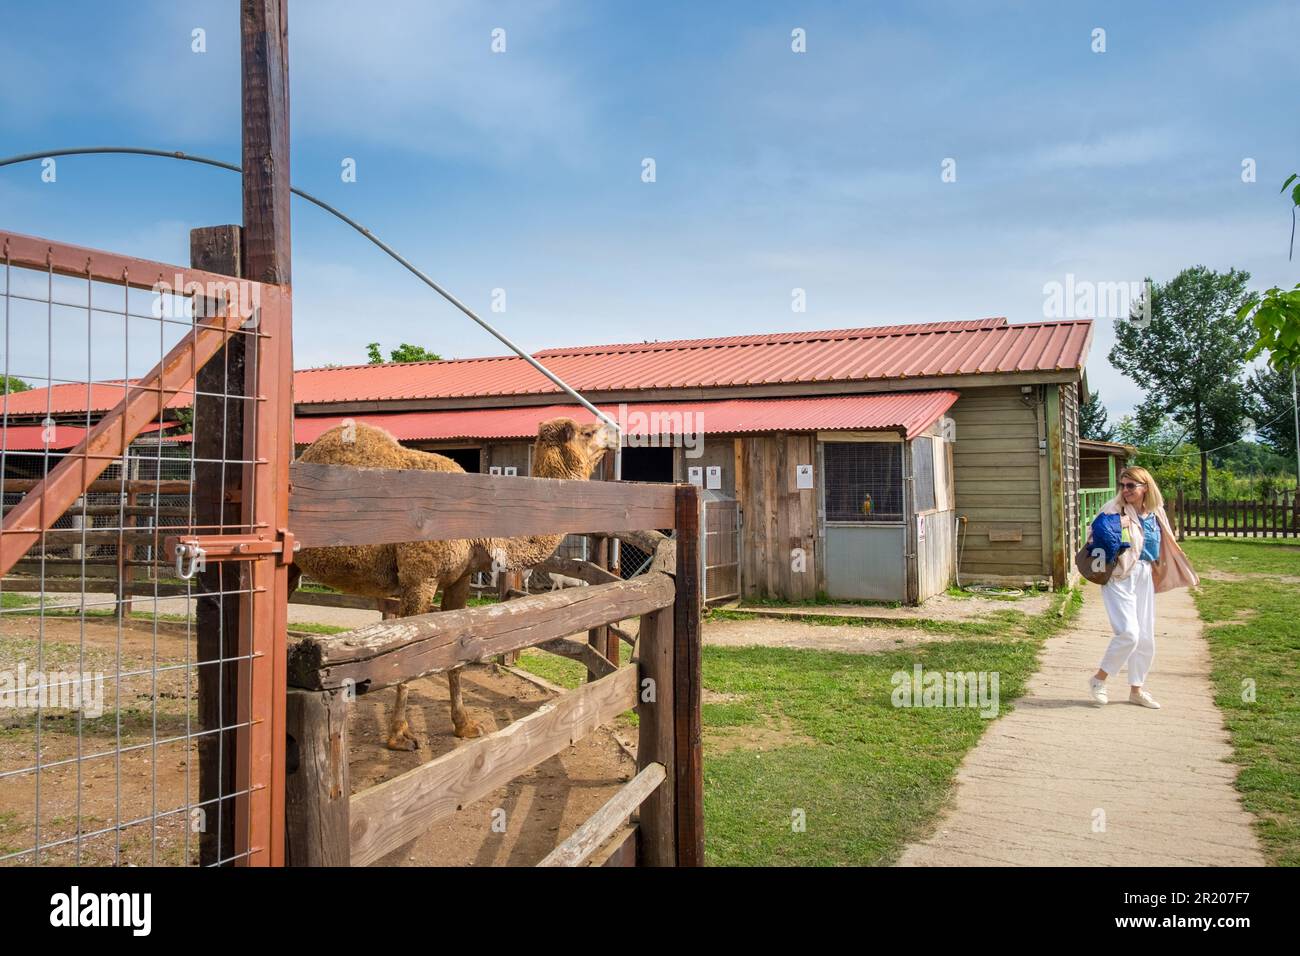 Arabian dromedary one humbed camel in a zoo and a woman staring at her.Karditsa , Greece Stock Photo